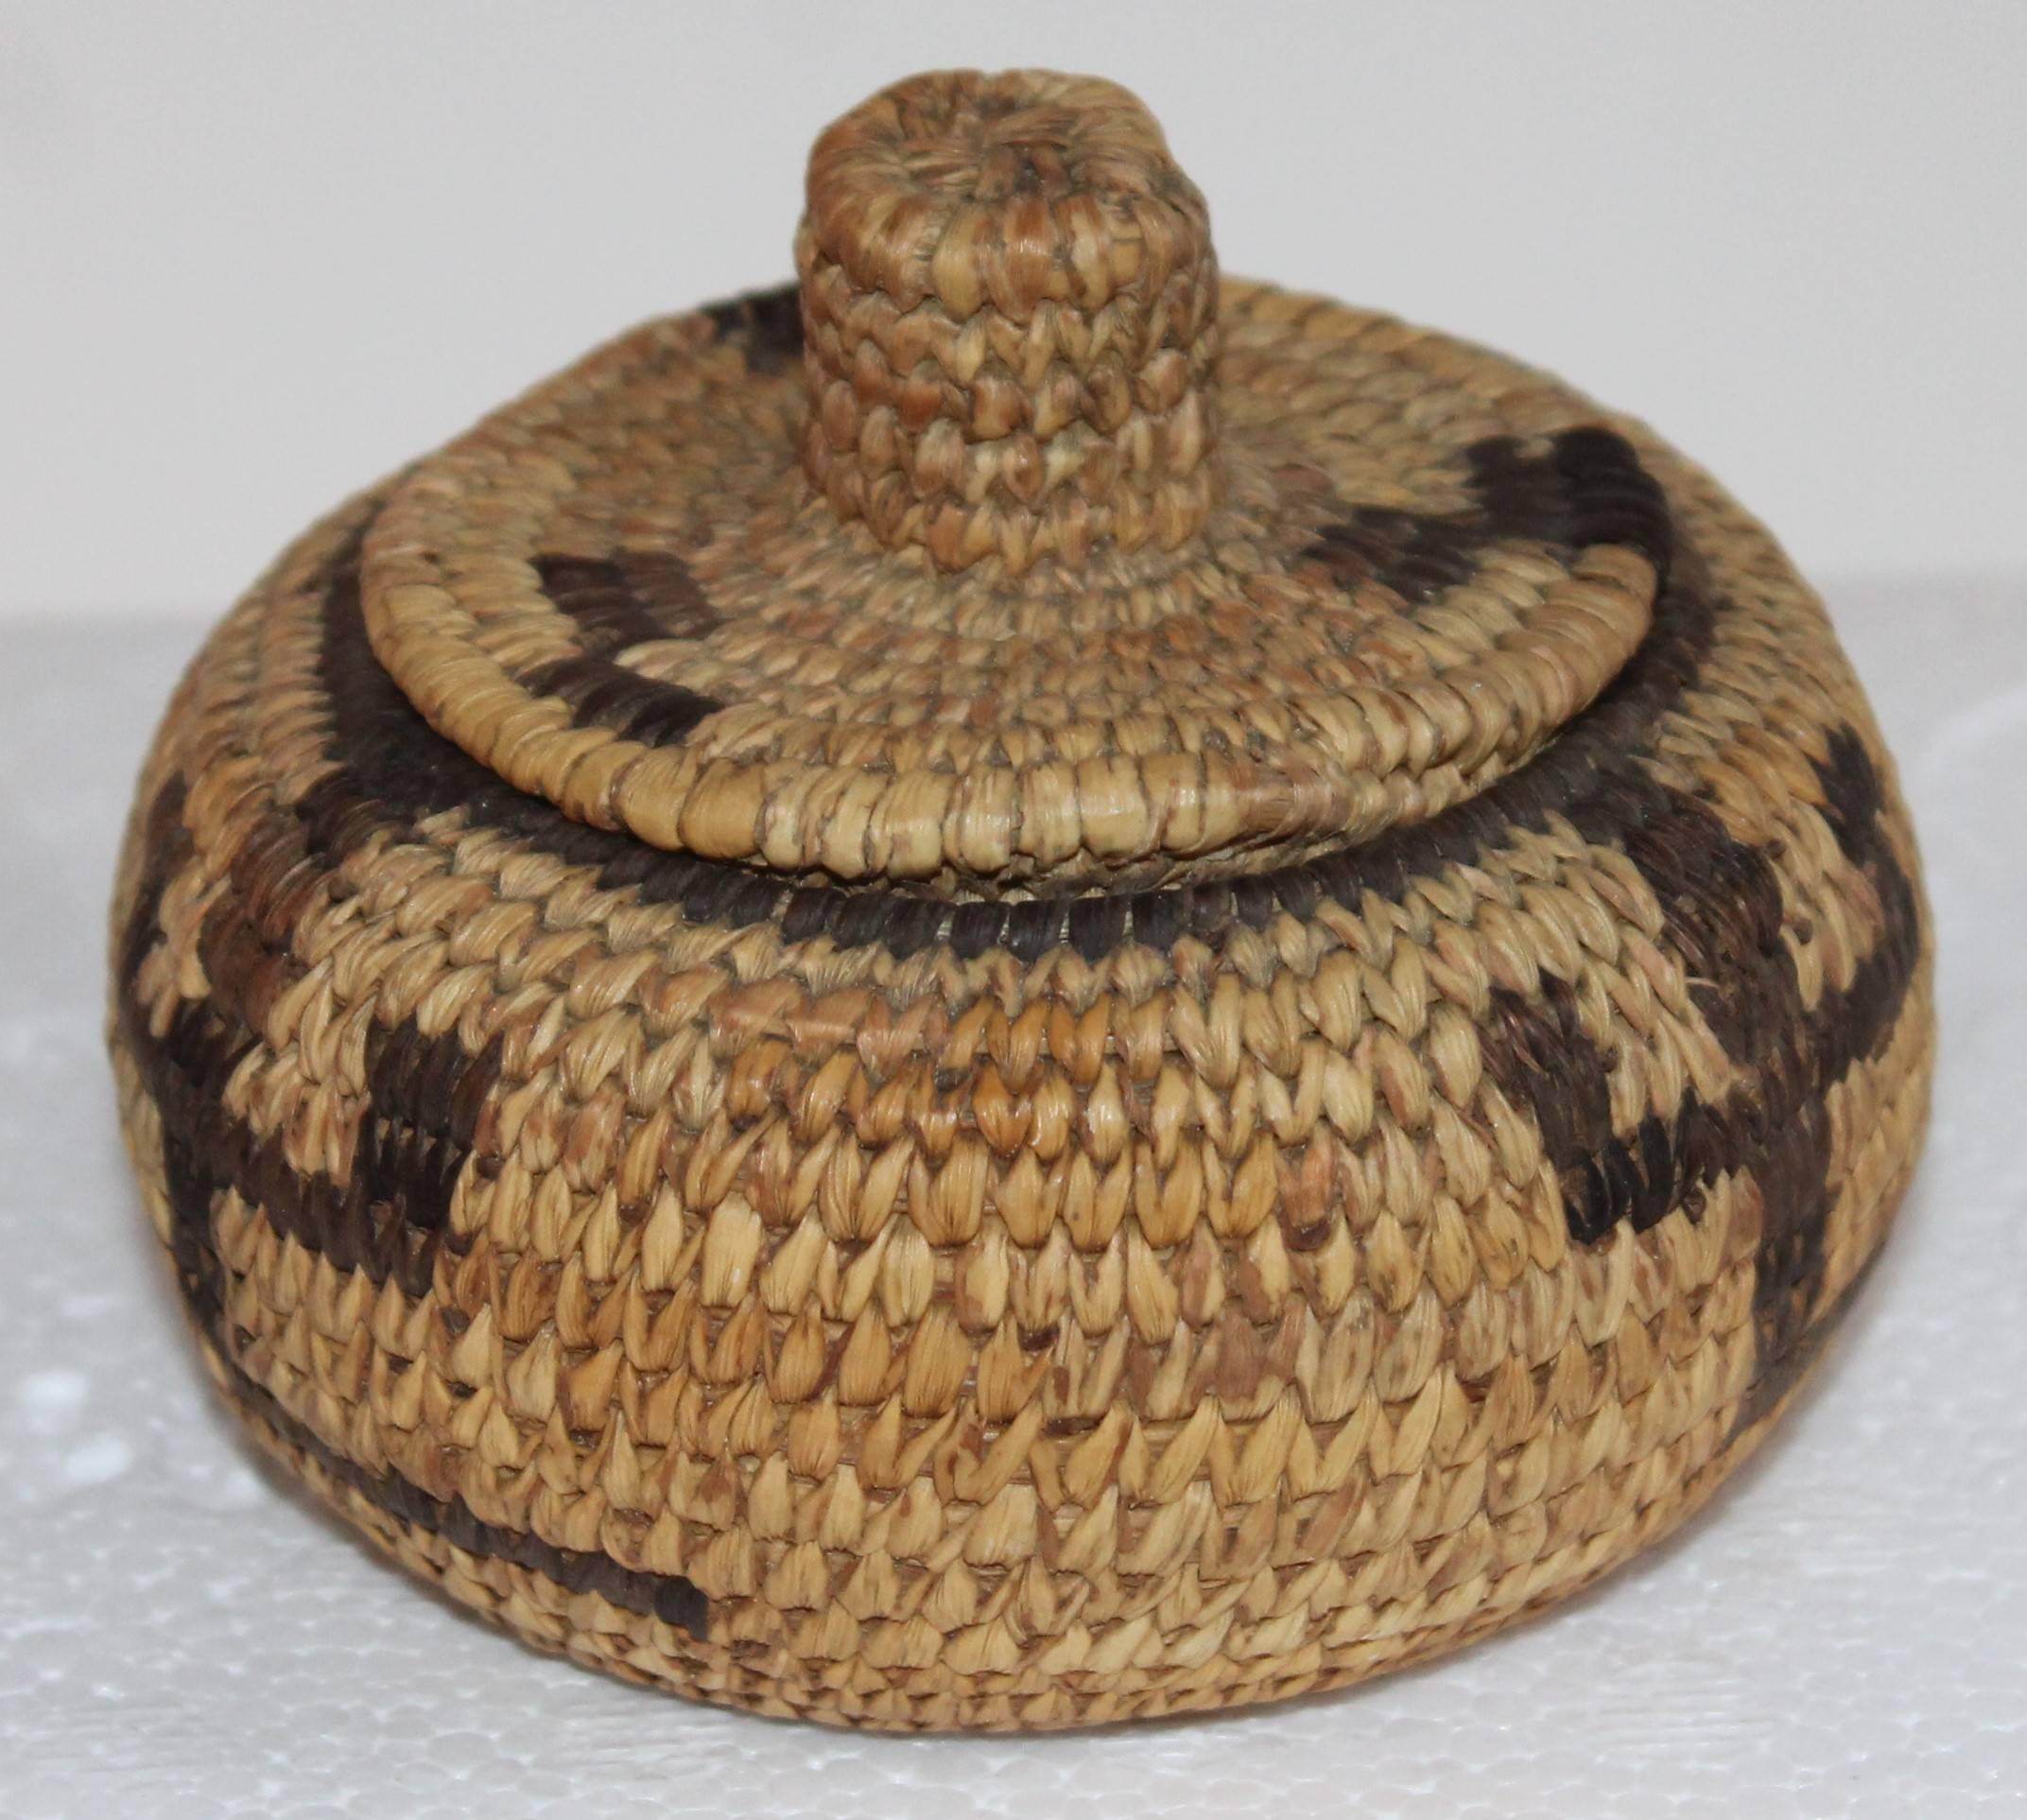 This fine little gem early 20th century Pima Indian basket is in pristine condition. The lid sits snug on the top of this little basket.